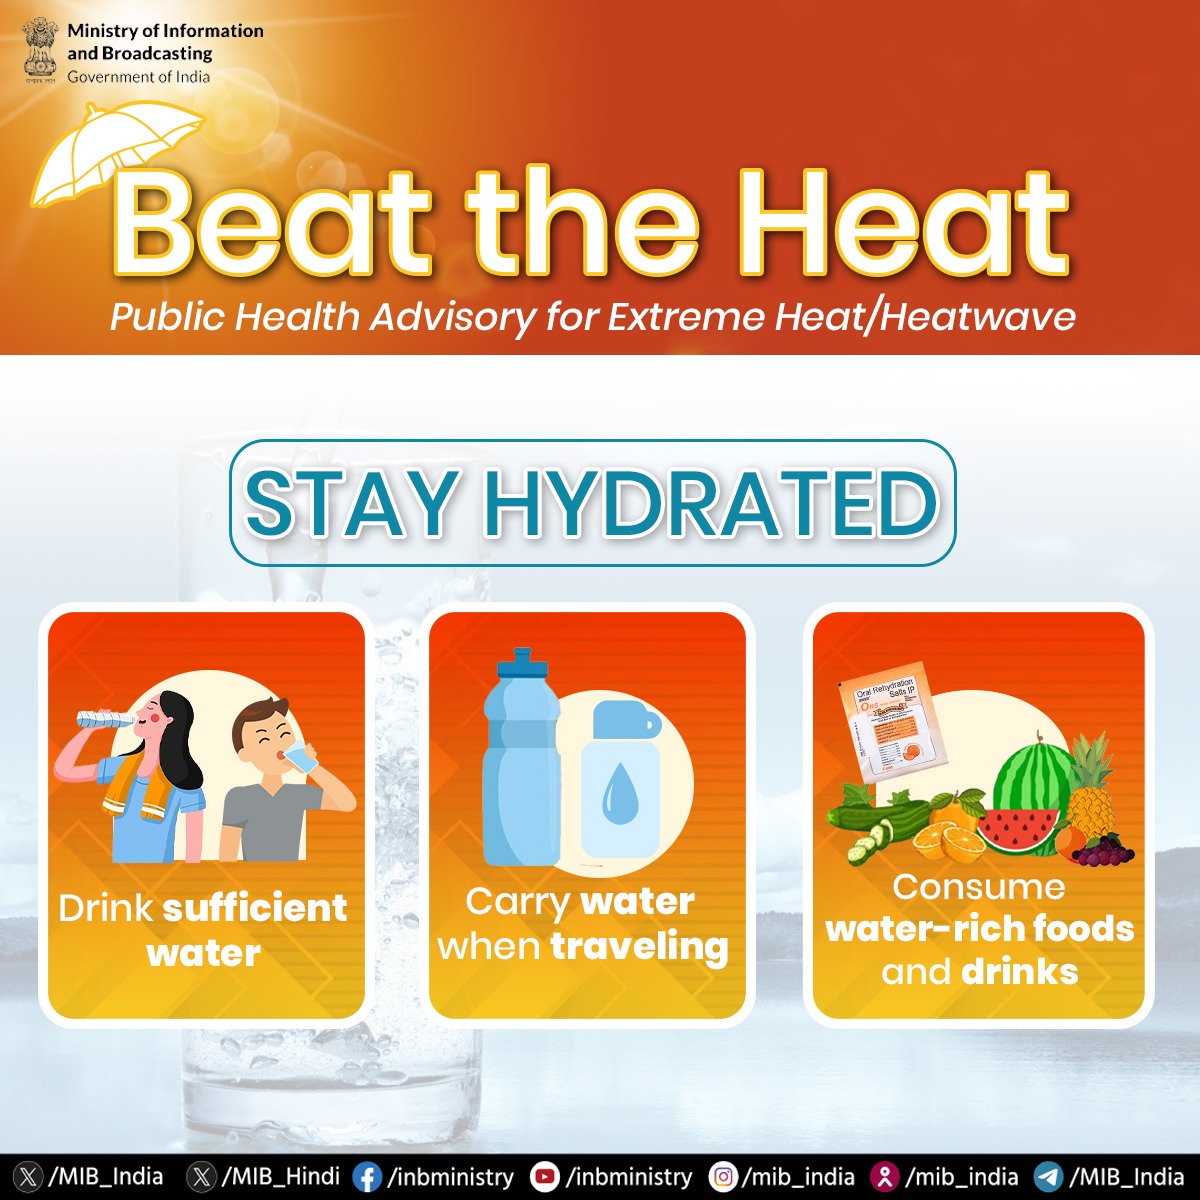 #HeatWave: Beat the Heat! 📝Public Health Advisory for Extreme Heat/Heatwave ▶️Stay Hydrated: 🔹Drink sufficient water 🔹Carry water when traveling 🔹Consume water-rich foods and drinks 🔹Stay safe & be #WeatherReady! @IMDWeather @Indiametdept @ndmaindia @PIB_India @DDNewslive